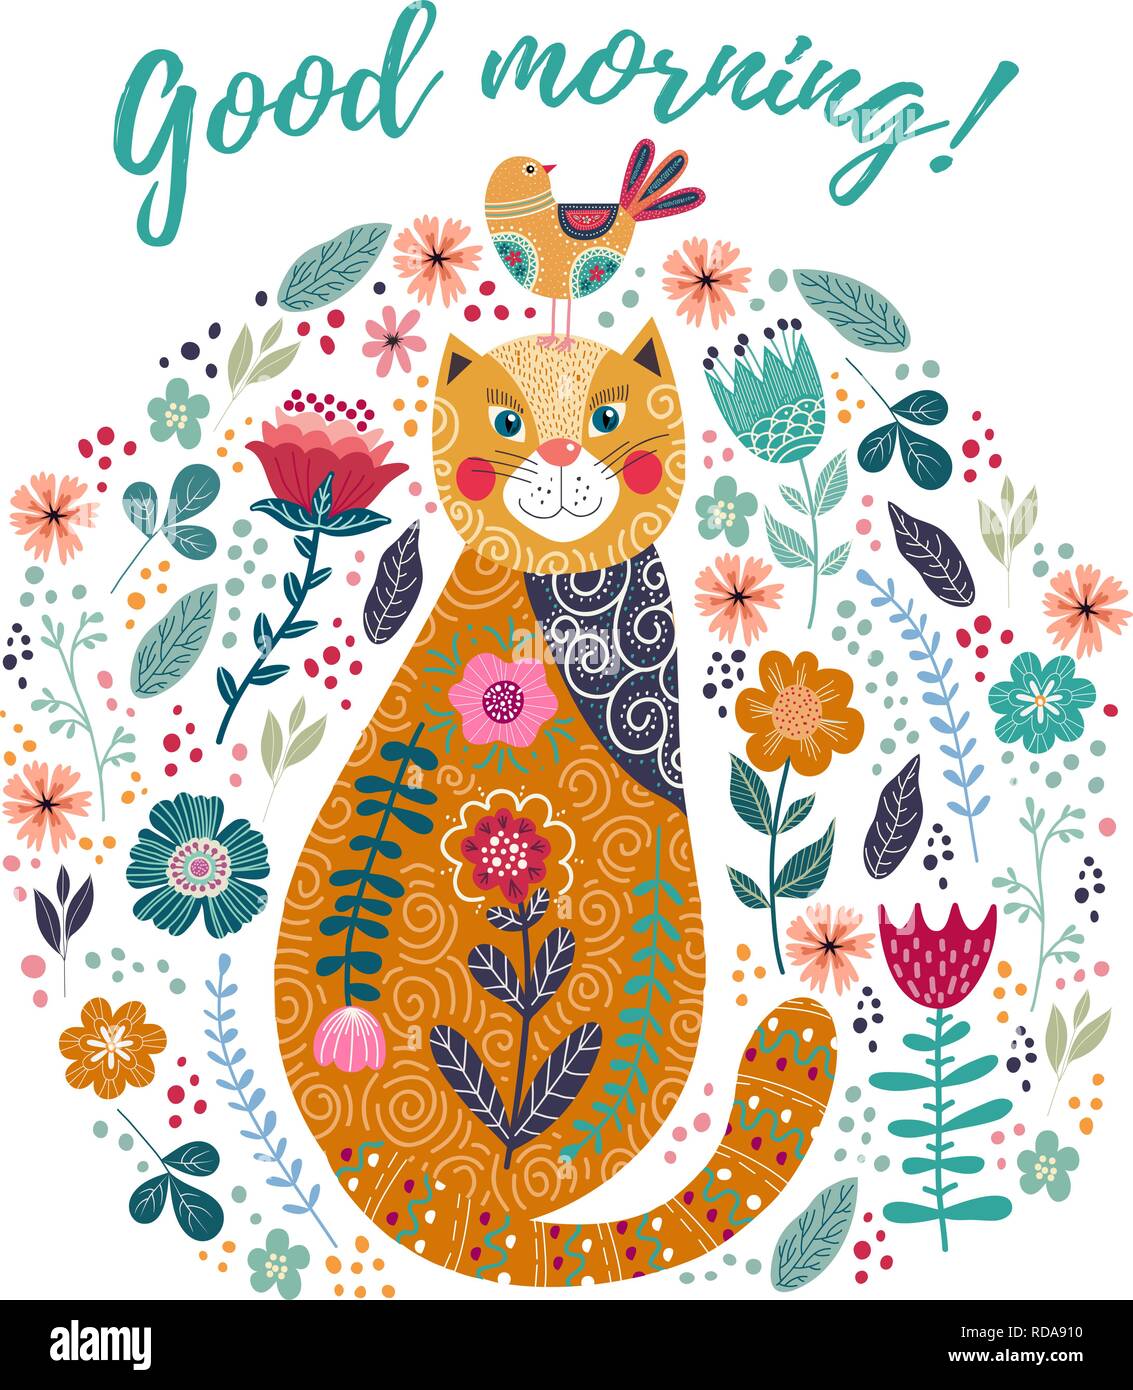 Good morning. Art vector colorful illustration with cute cat, bird ...